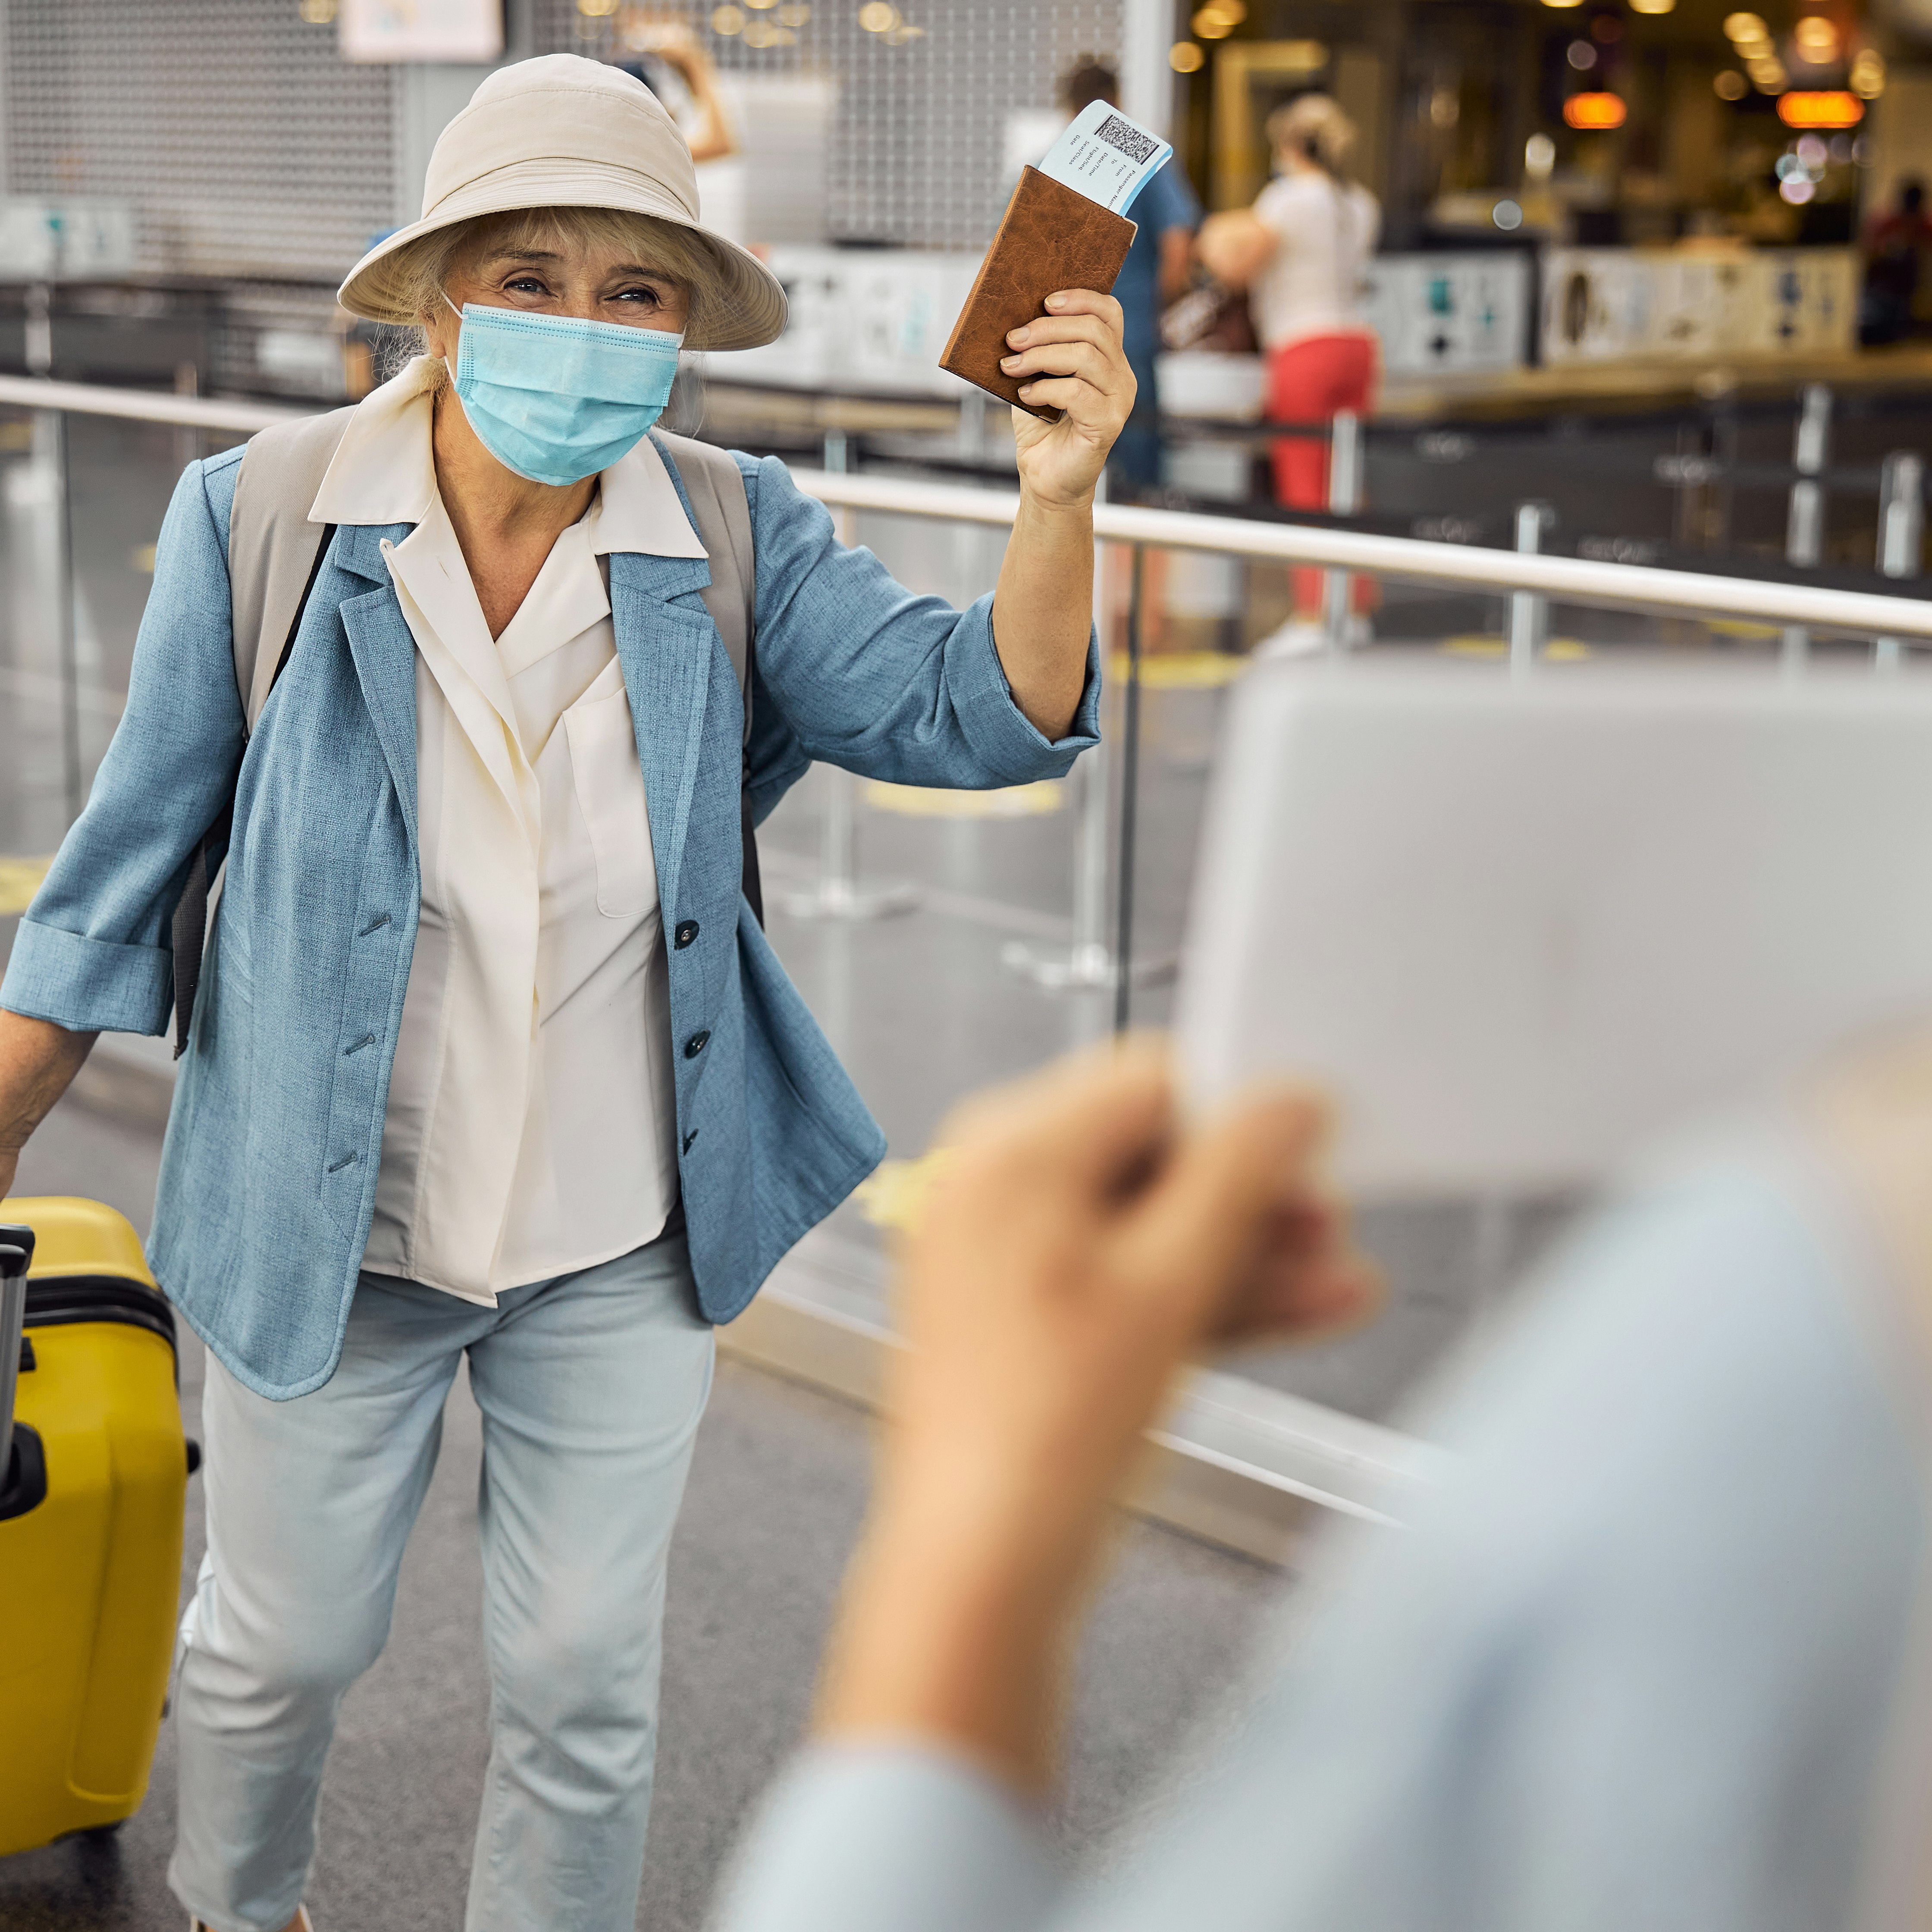 Newly arrived female passenger in a face mask walking towards a man with a sign